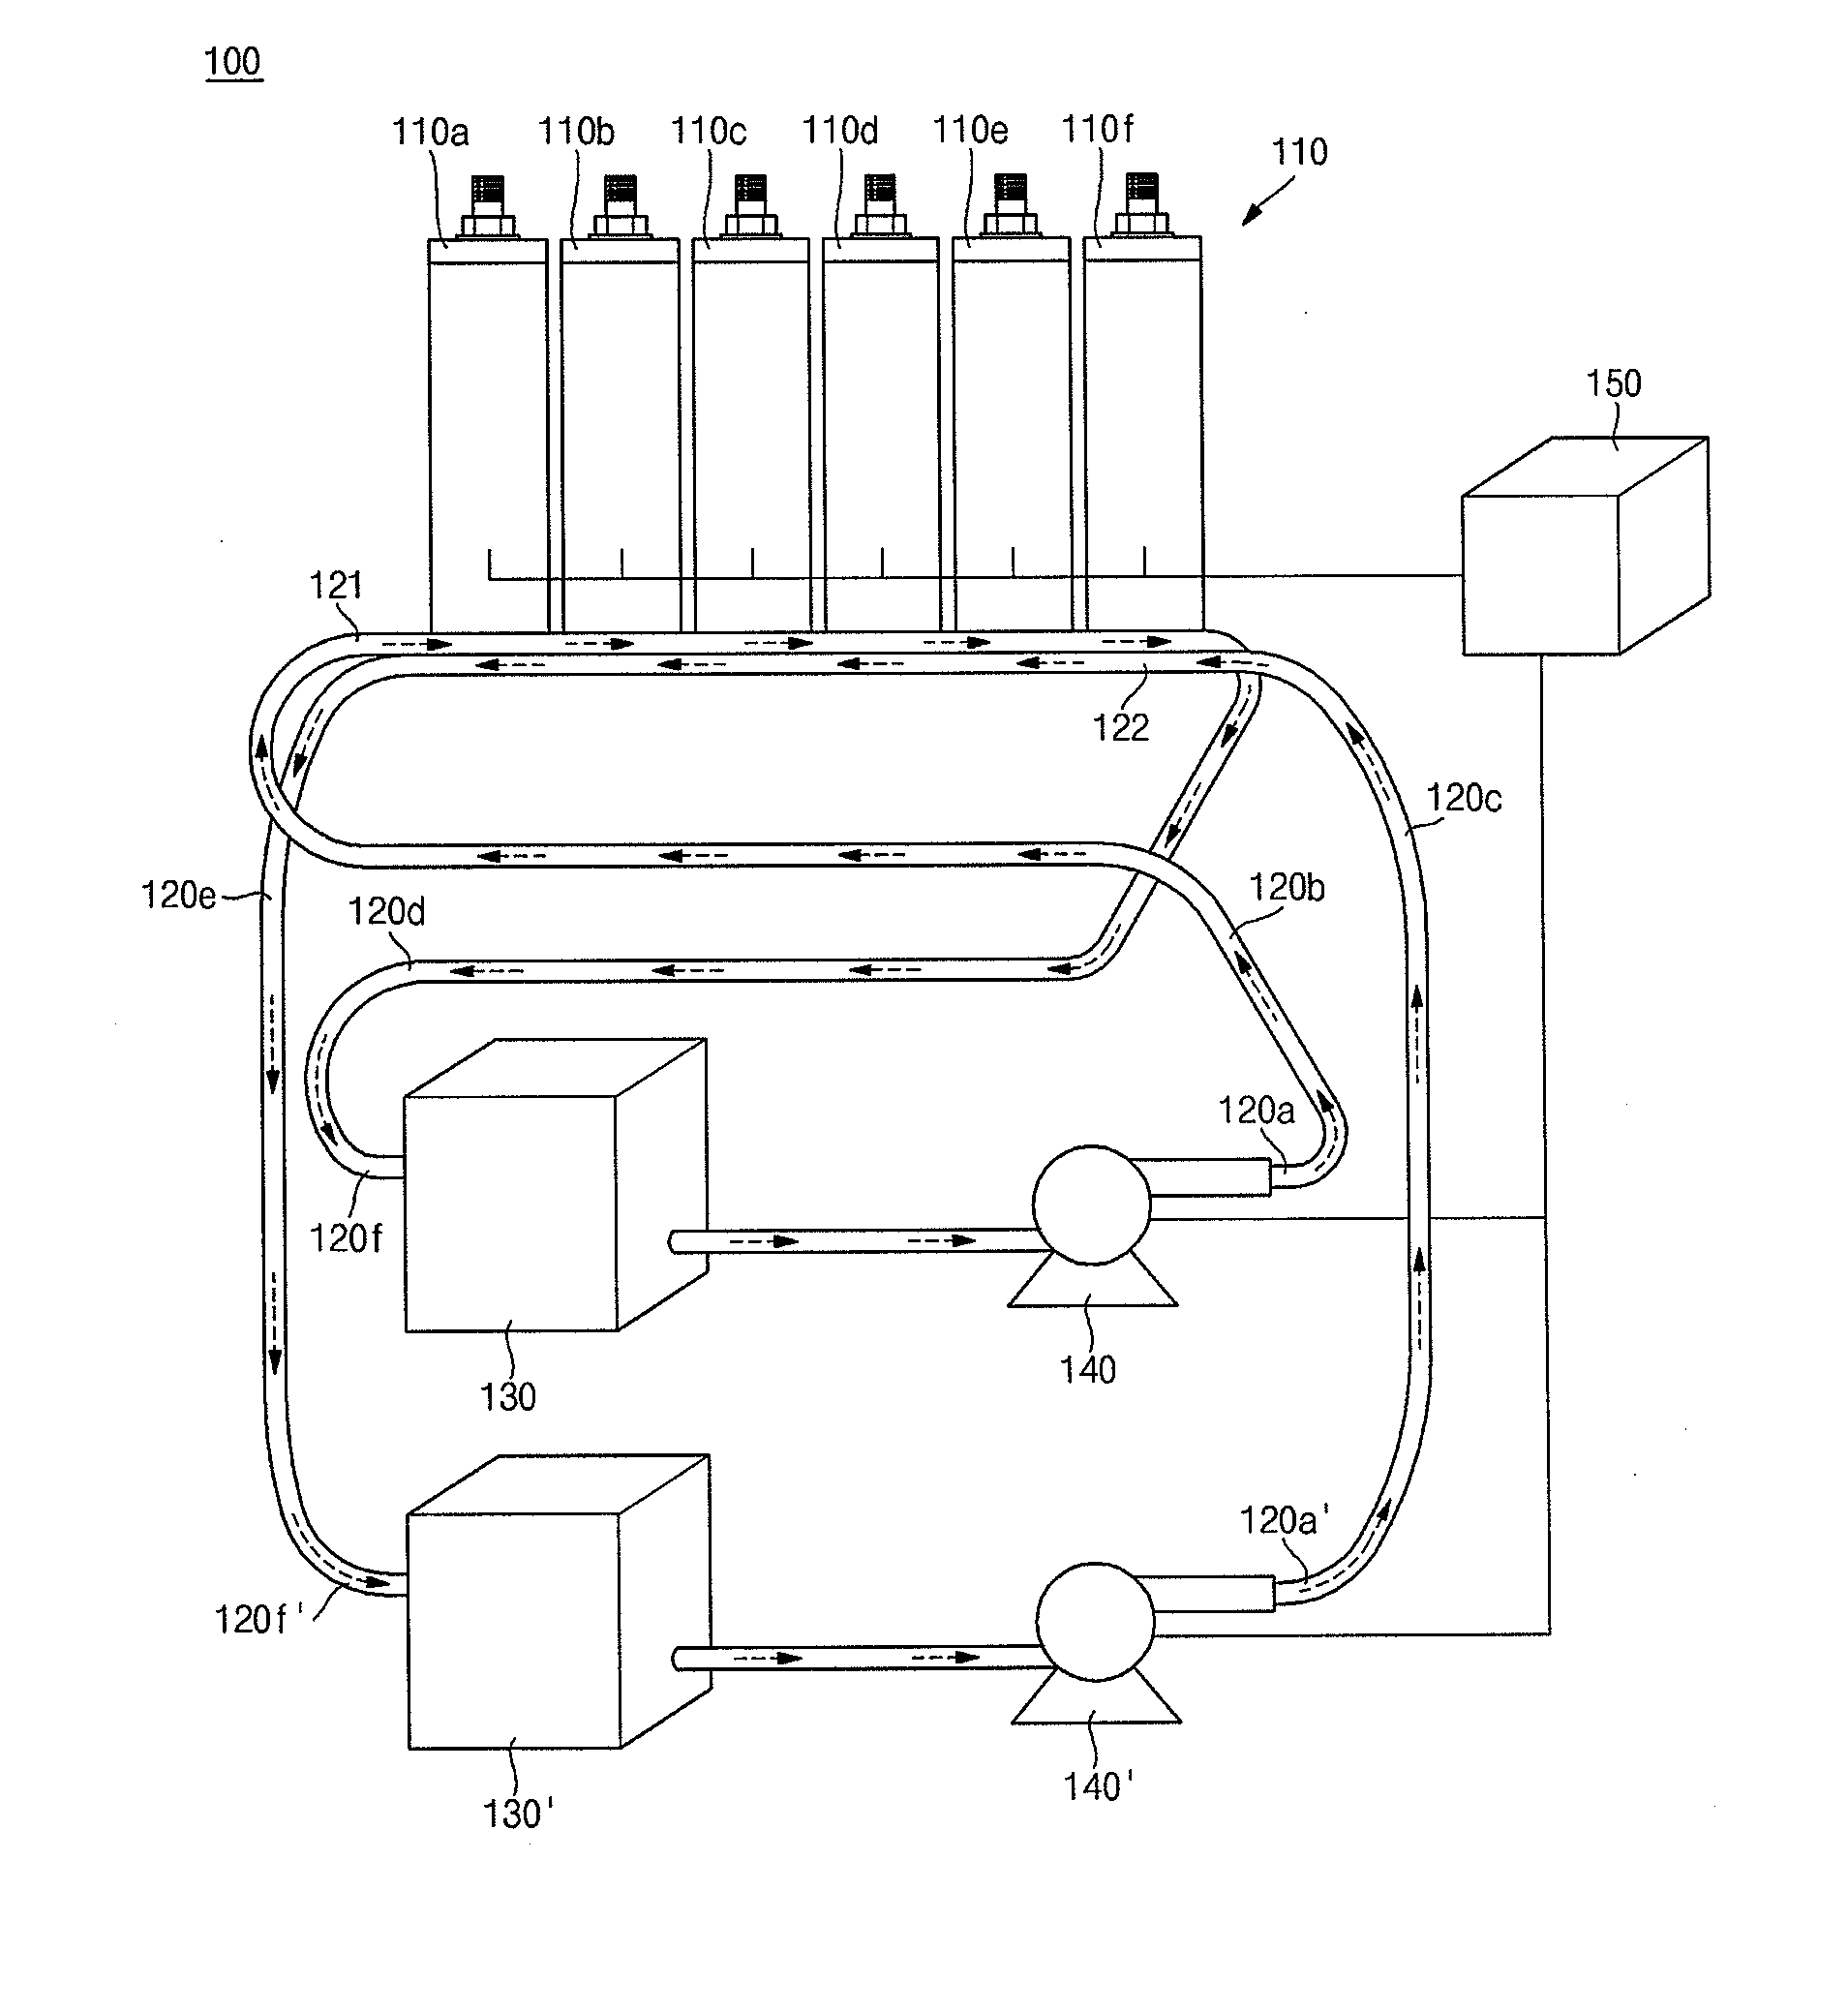 Battery pack and cooling system for a battery pack